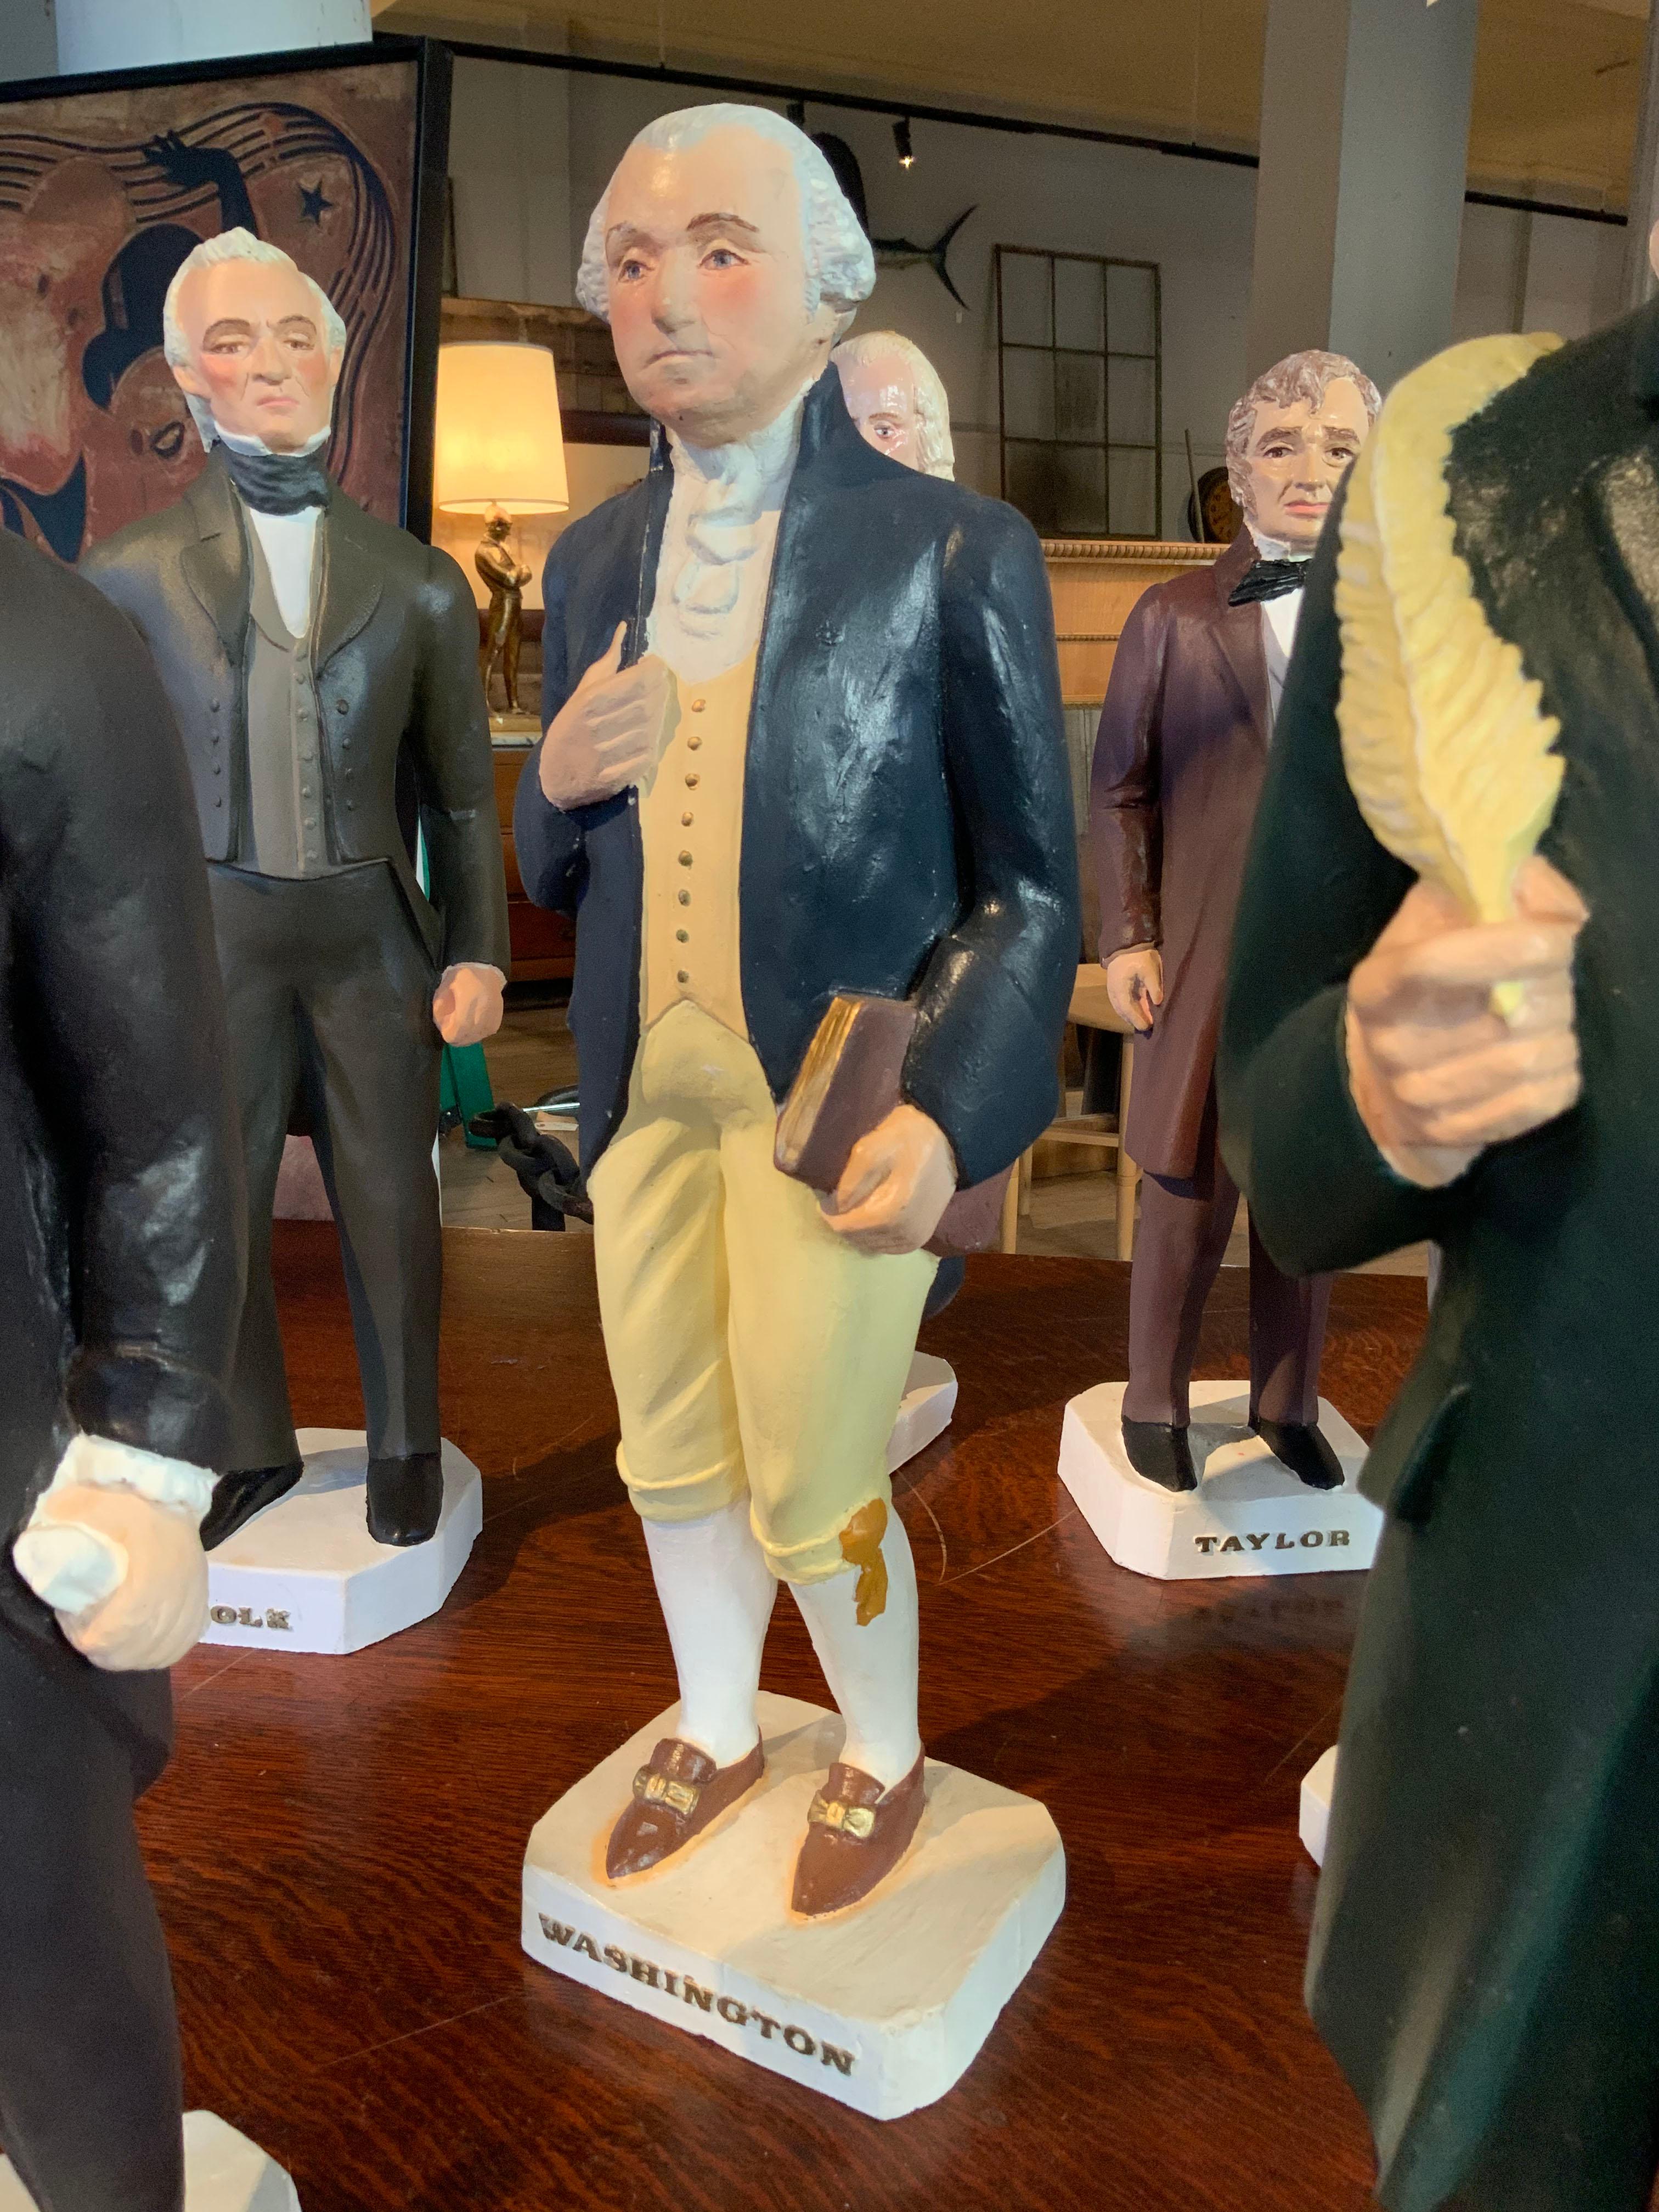 A collection of twelve 2' tall plaster statues of former U.S. presidents. Made by the David Hamberger Display Company in the 1960s. Very charming in form and scale. All are hand painted.